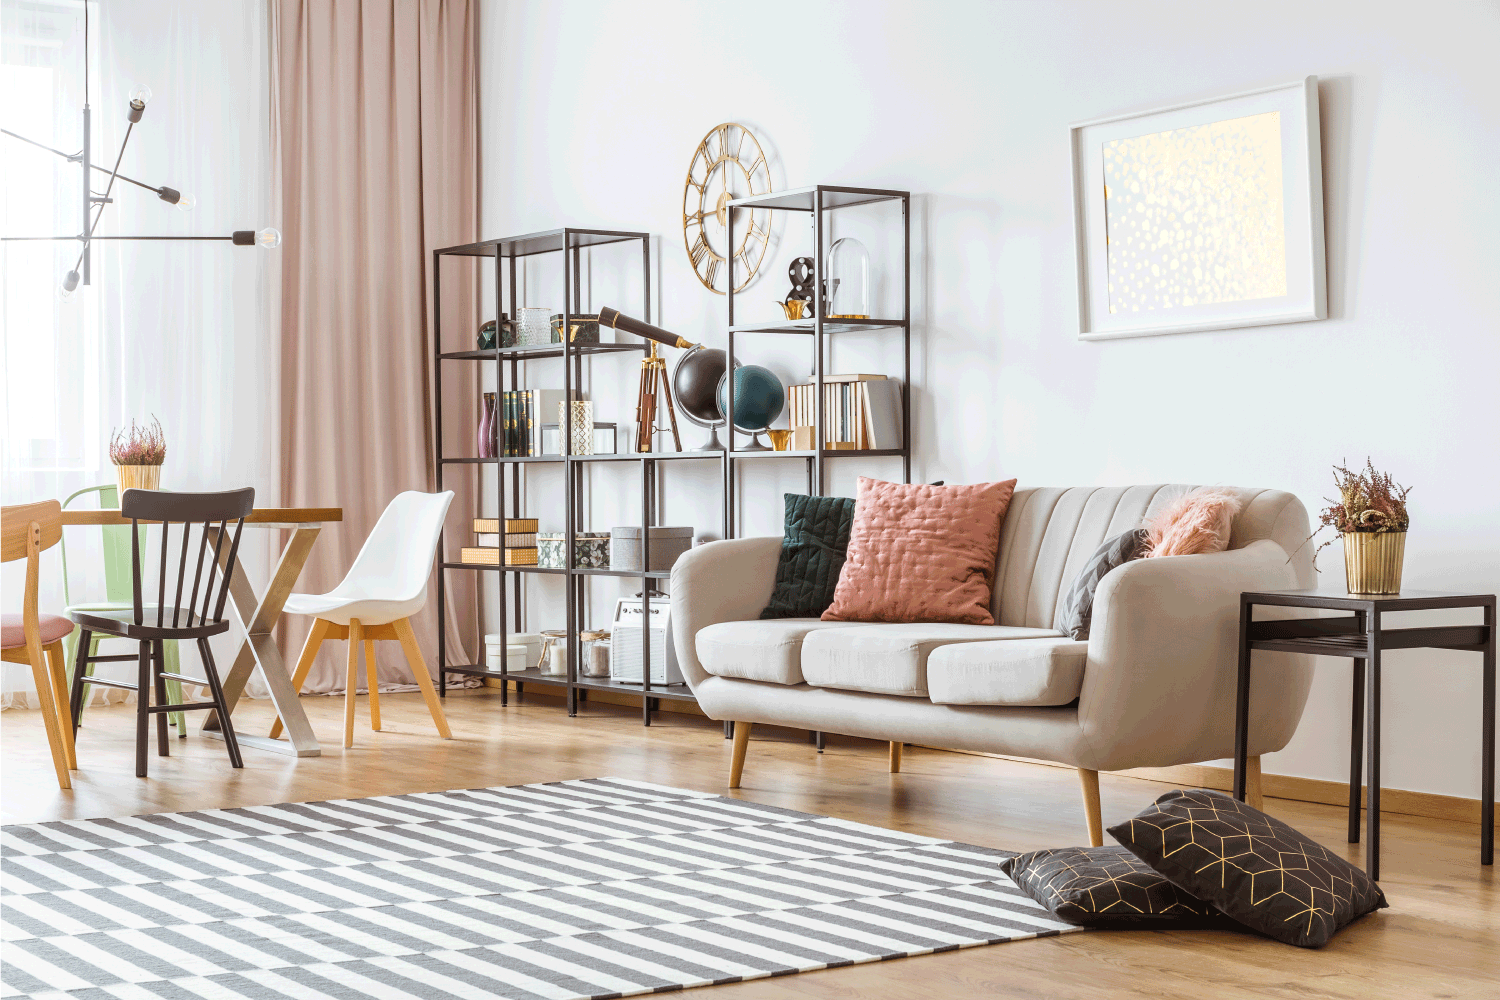 Eclectic Blush Beige Living Room. Painting on white wall above sofa with cushions in living room interior with chairs at the table under metal lamp